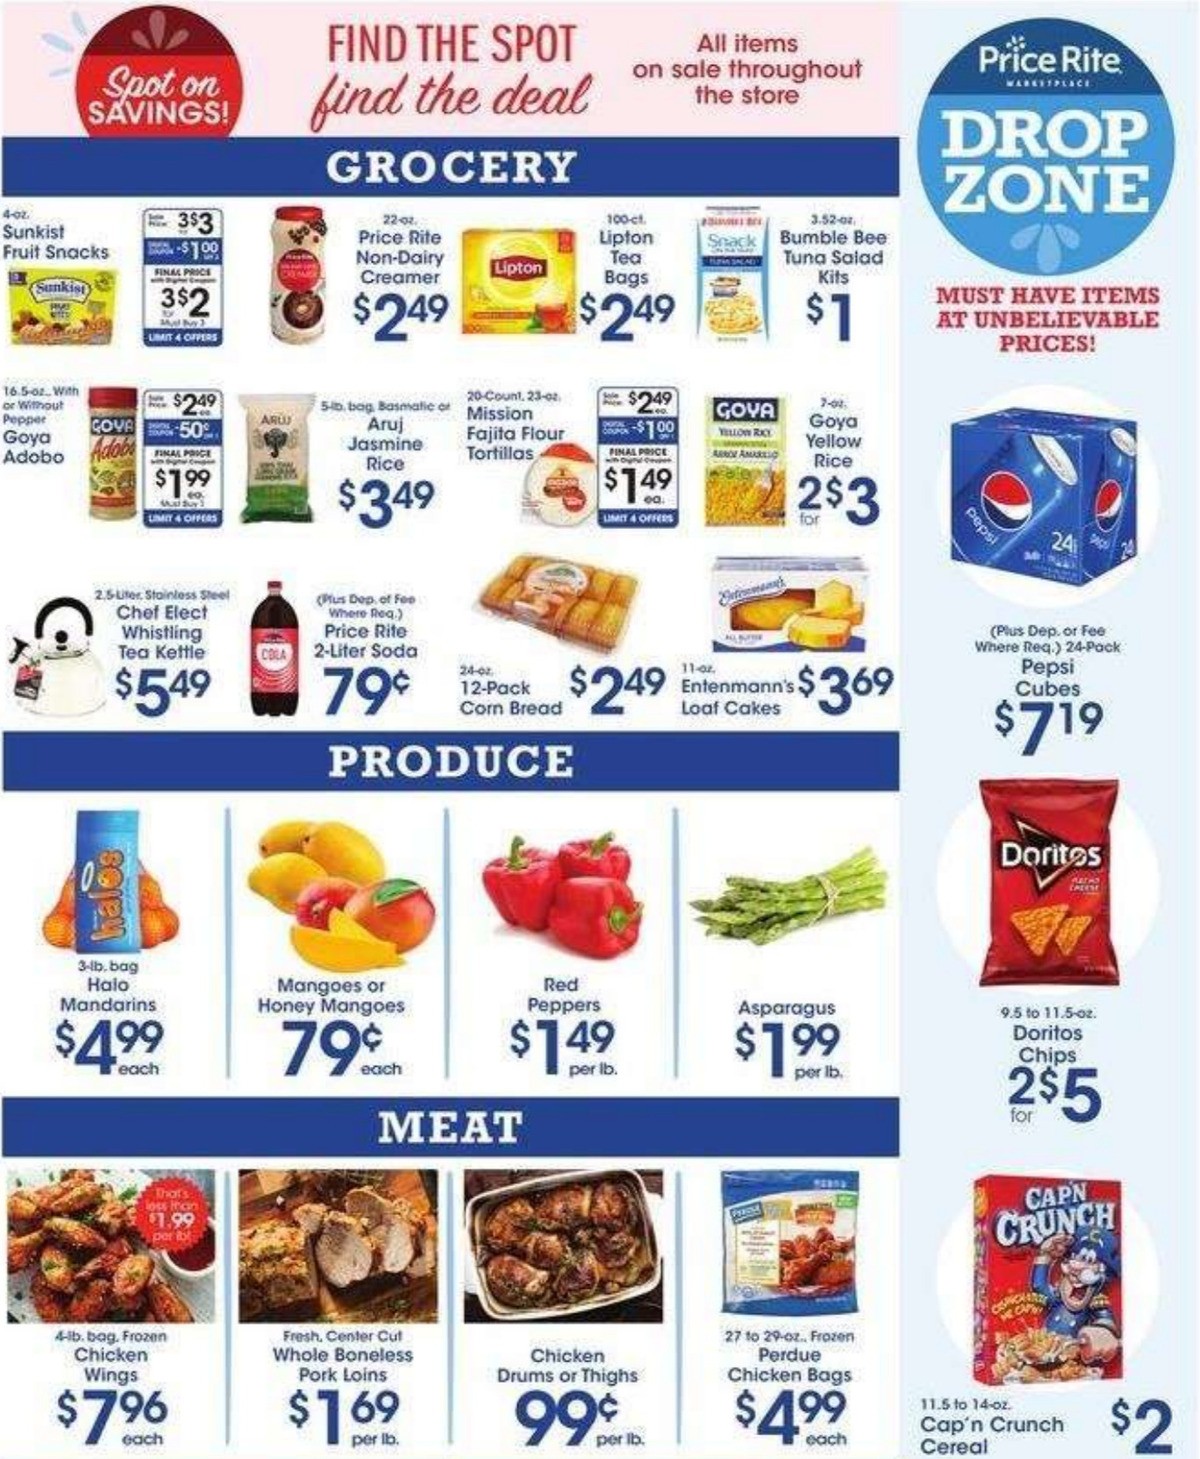 Price Rite Weekly Ad from February 26